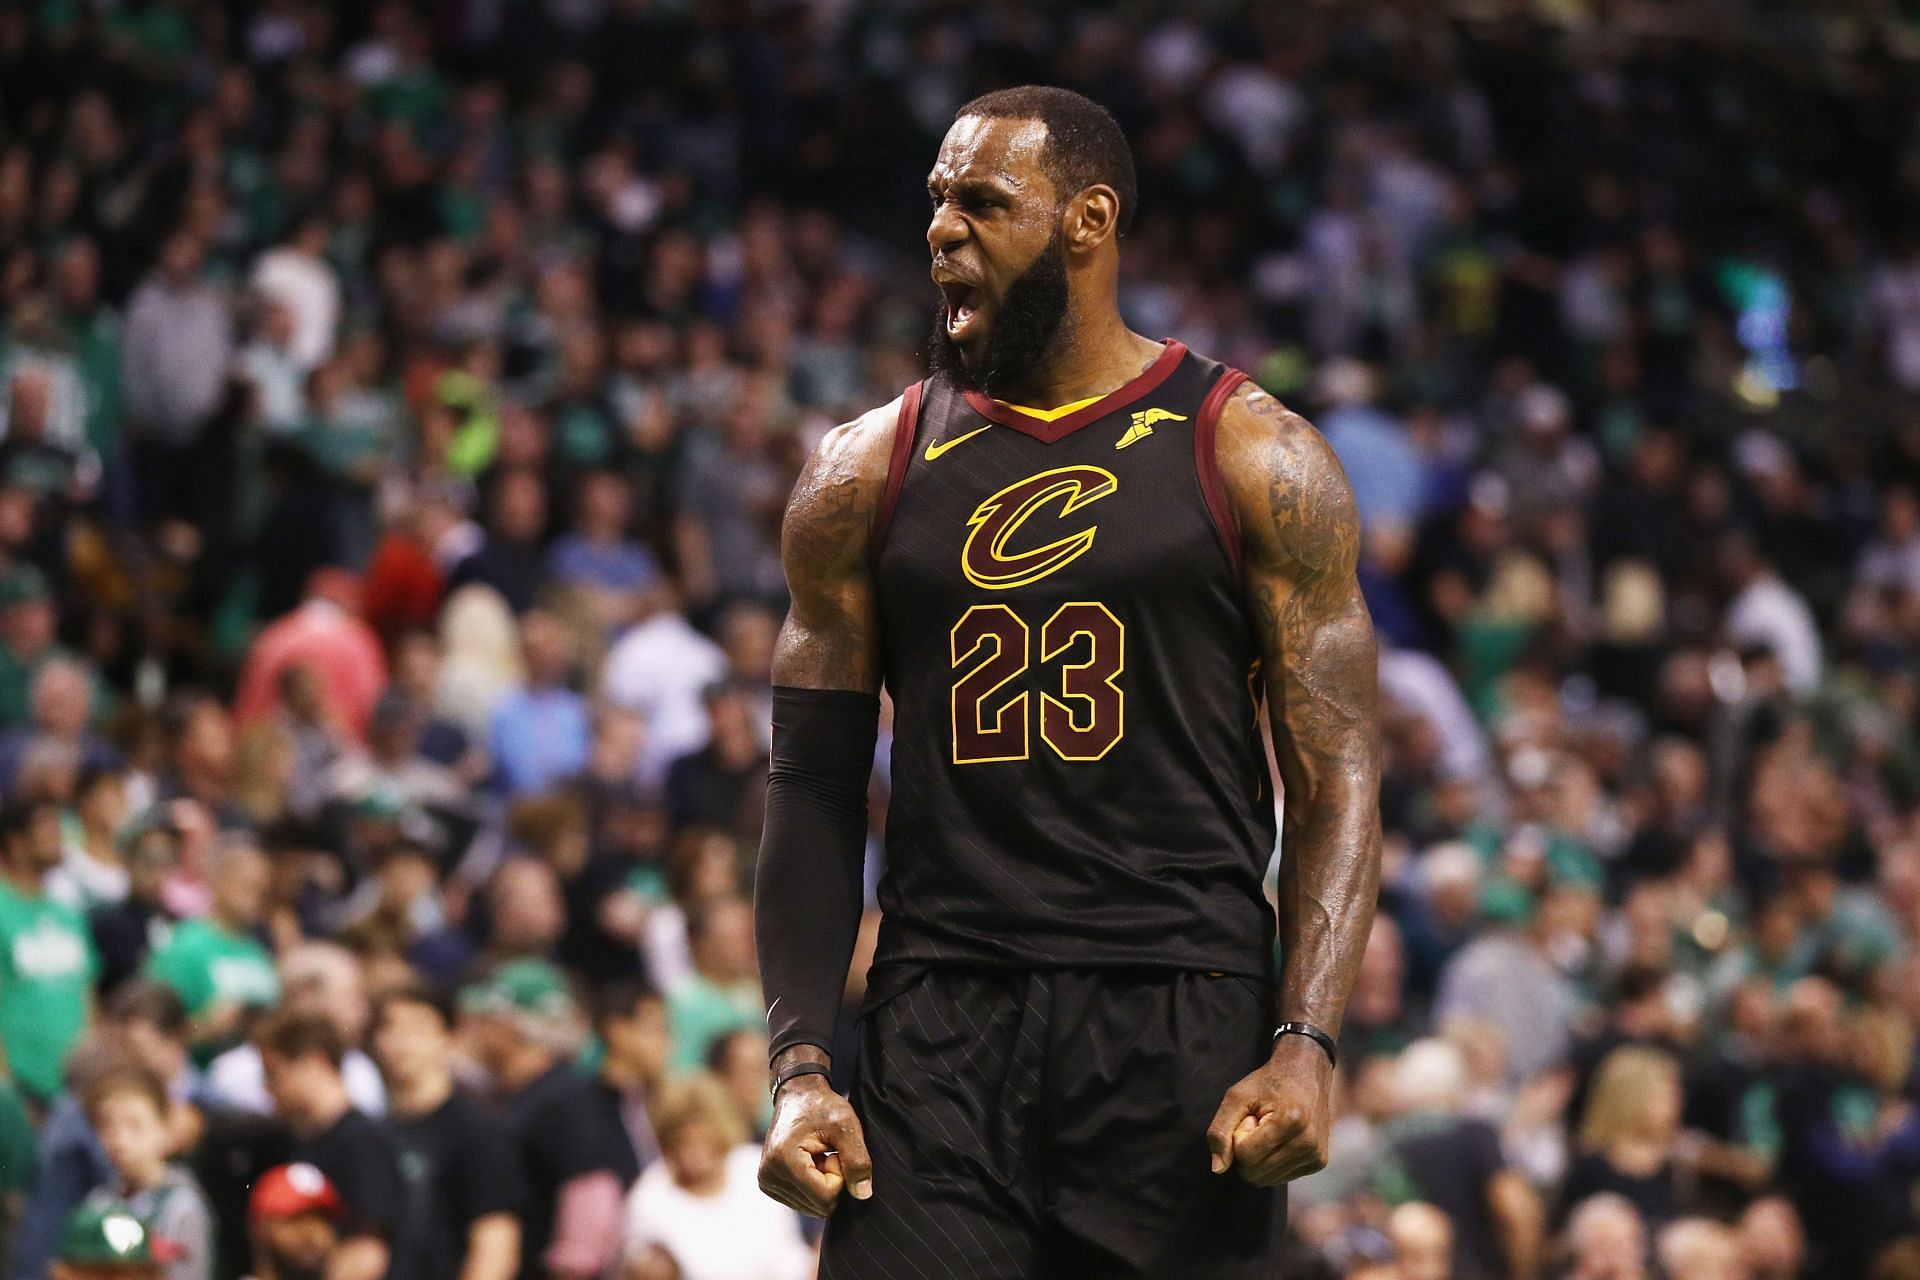 2018 was arguably the best version of LeBron James